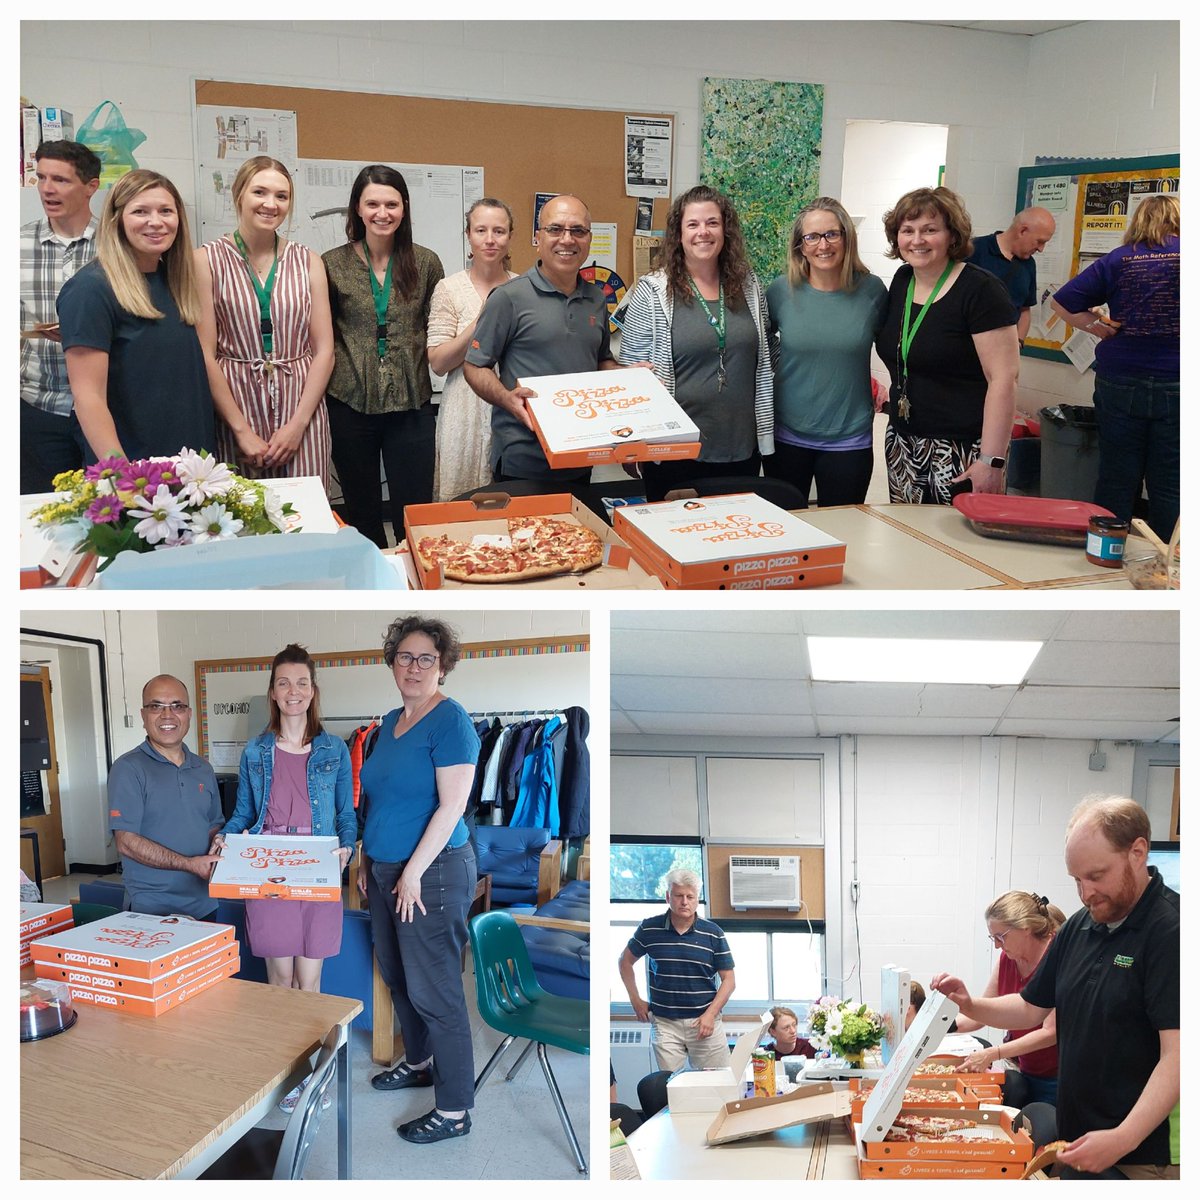 Today, for Teacher's Appreciation Day, I provided a hot and fresh pizza party lunch to the teachers of LCVI ans Calvin Park. I wanted to thank them for the Nobel and thankless work they do, teaching our kids to be great Canadians and Human Beings. #ldbs #thankyouteachers